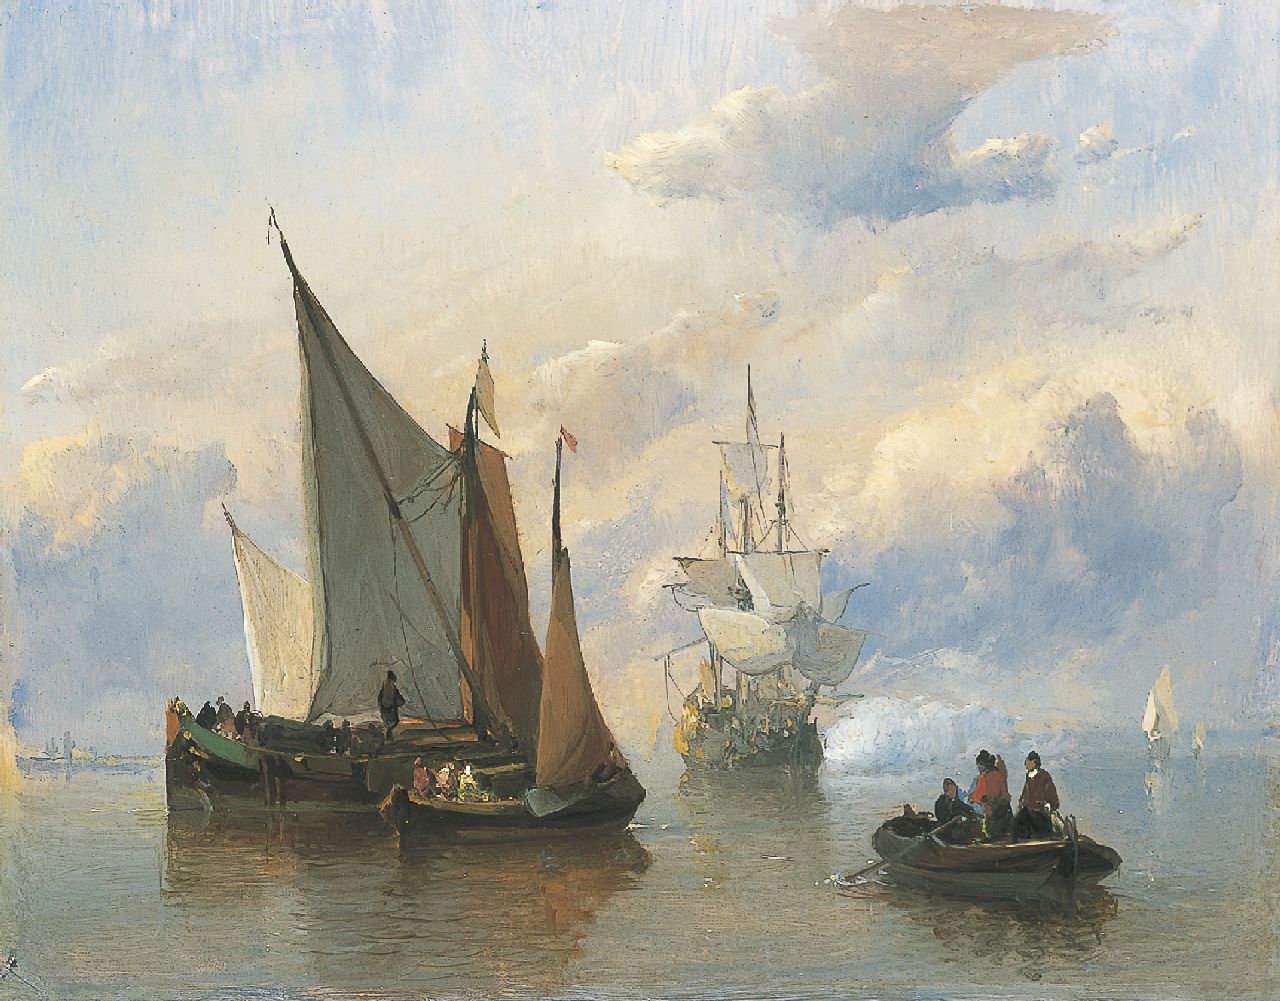 Koster E.  | Everhardus Koster, Sailing vessels and a three-master in a calm, Öl auf Holz 19,2 x 24,6 cm